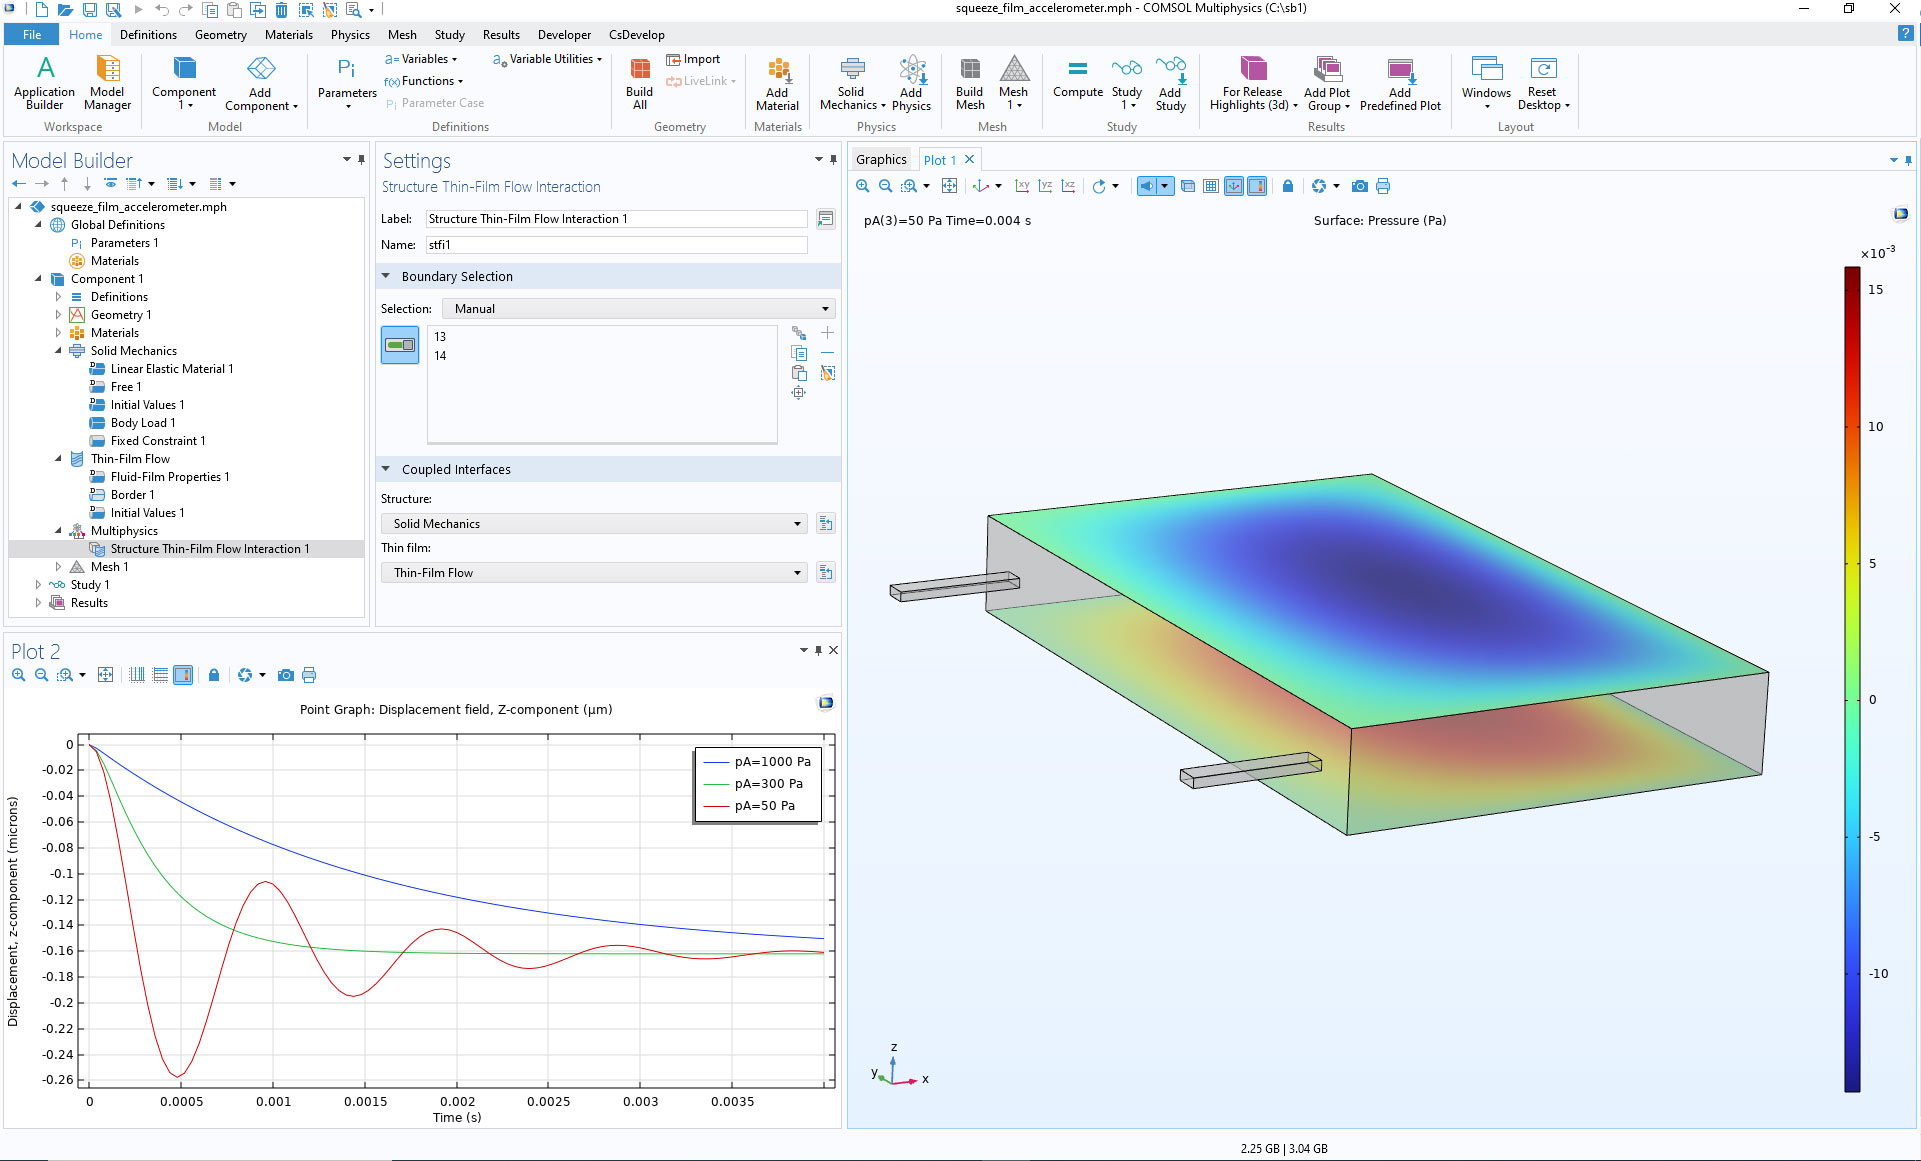 The COMSOL Multiphysics UI showing the Model Builder with the Structure Thin-Film Flow Interaction node highlighted, the corresponding Settings window, and an accelerometer model in the Graphics window.